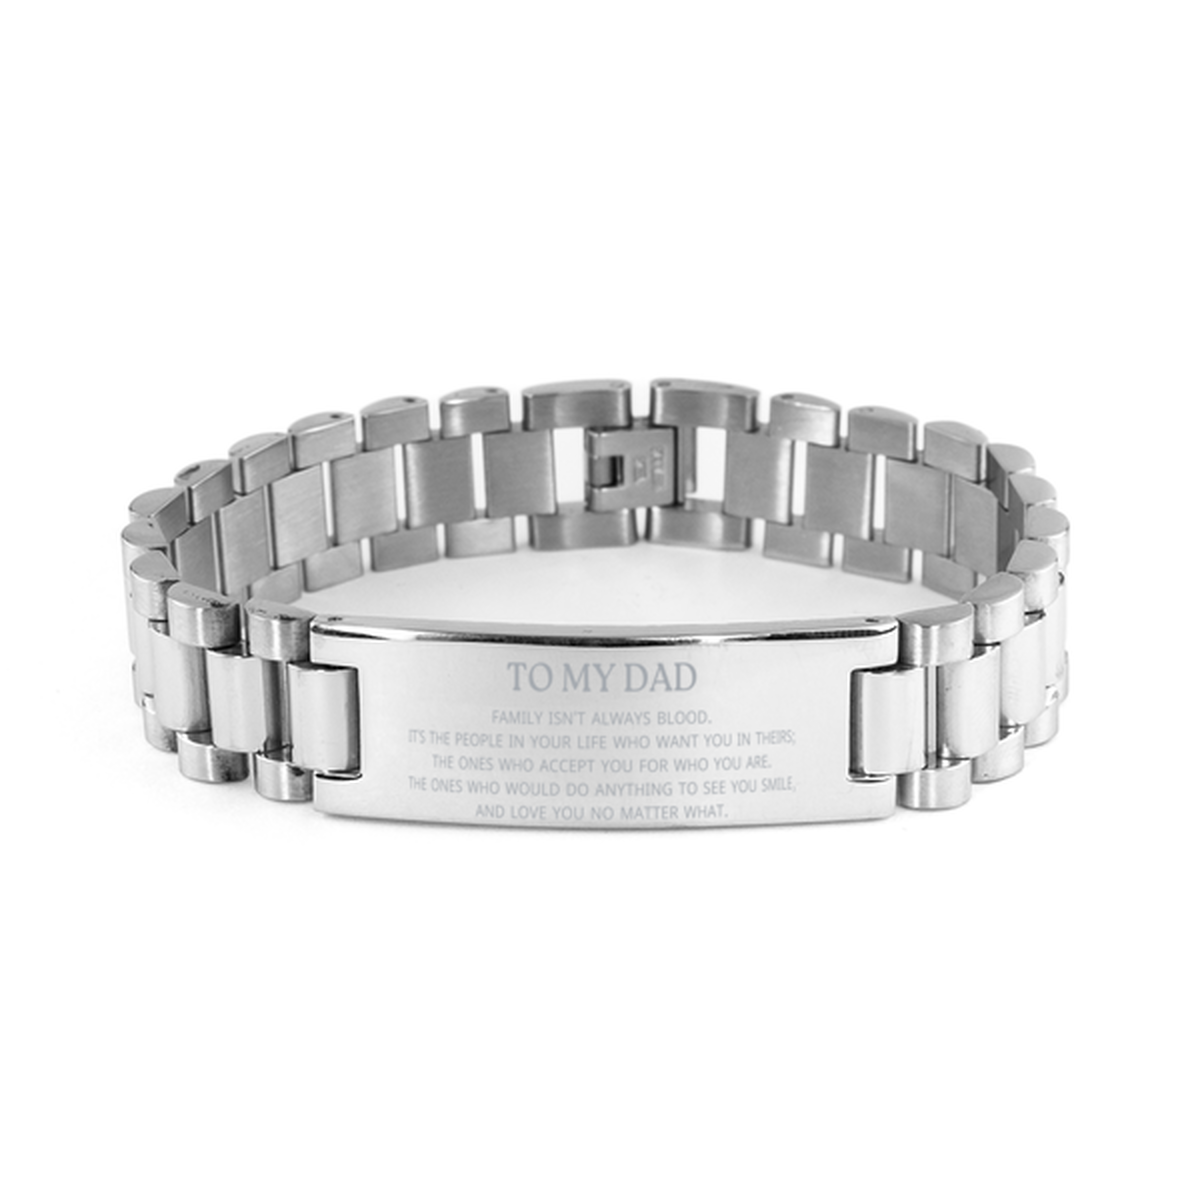 To My Dad Gifts, Family isn't always blood, Dad Ladder Stainless Steel Bracelet, Birthday Christmas Unique Present For Dad